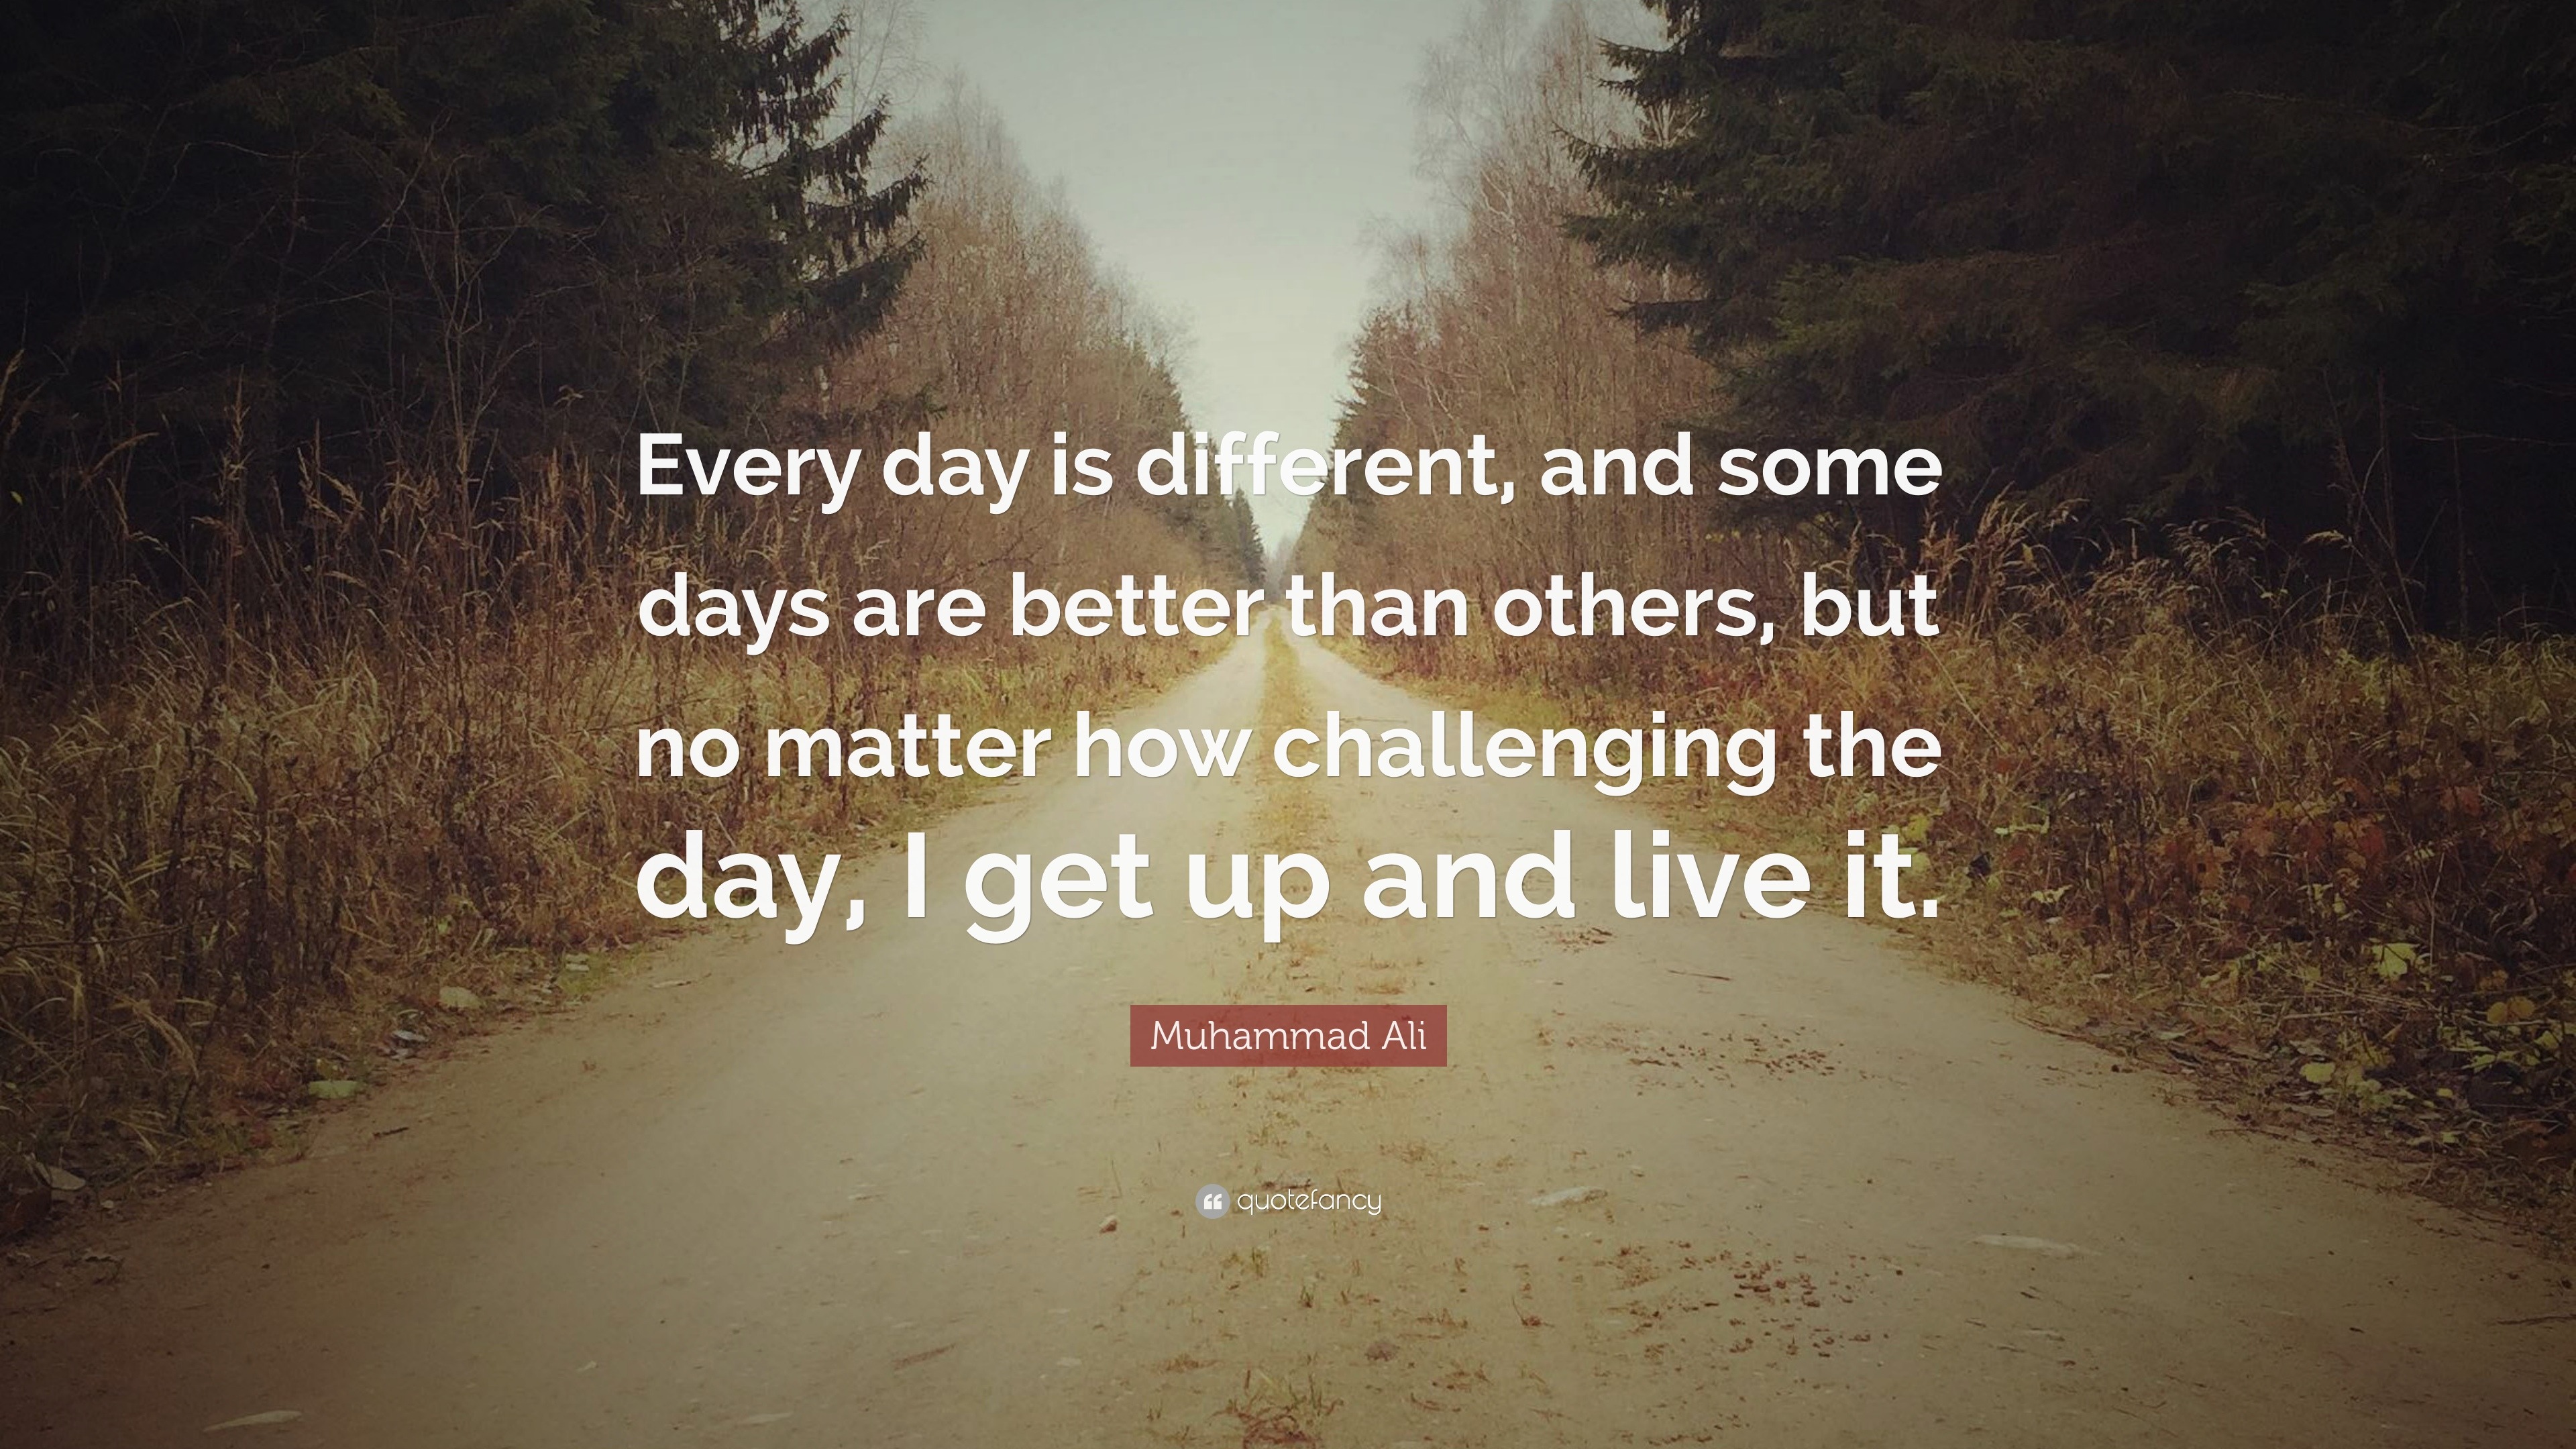 Muhammad Ali Quote: “Every Day Is Different, And Some Days Are Better Than Others, But No Matter How Challenging The Day, I Get Up And Live I...”